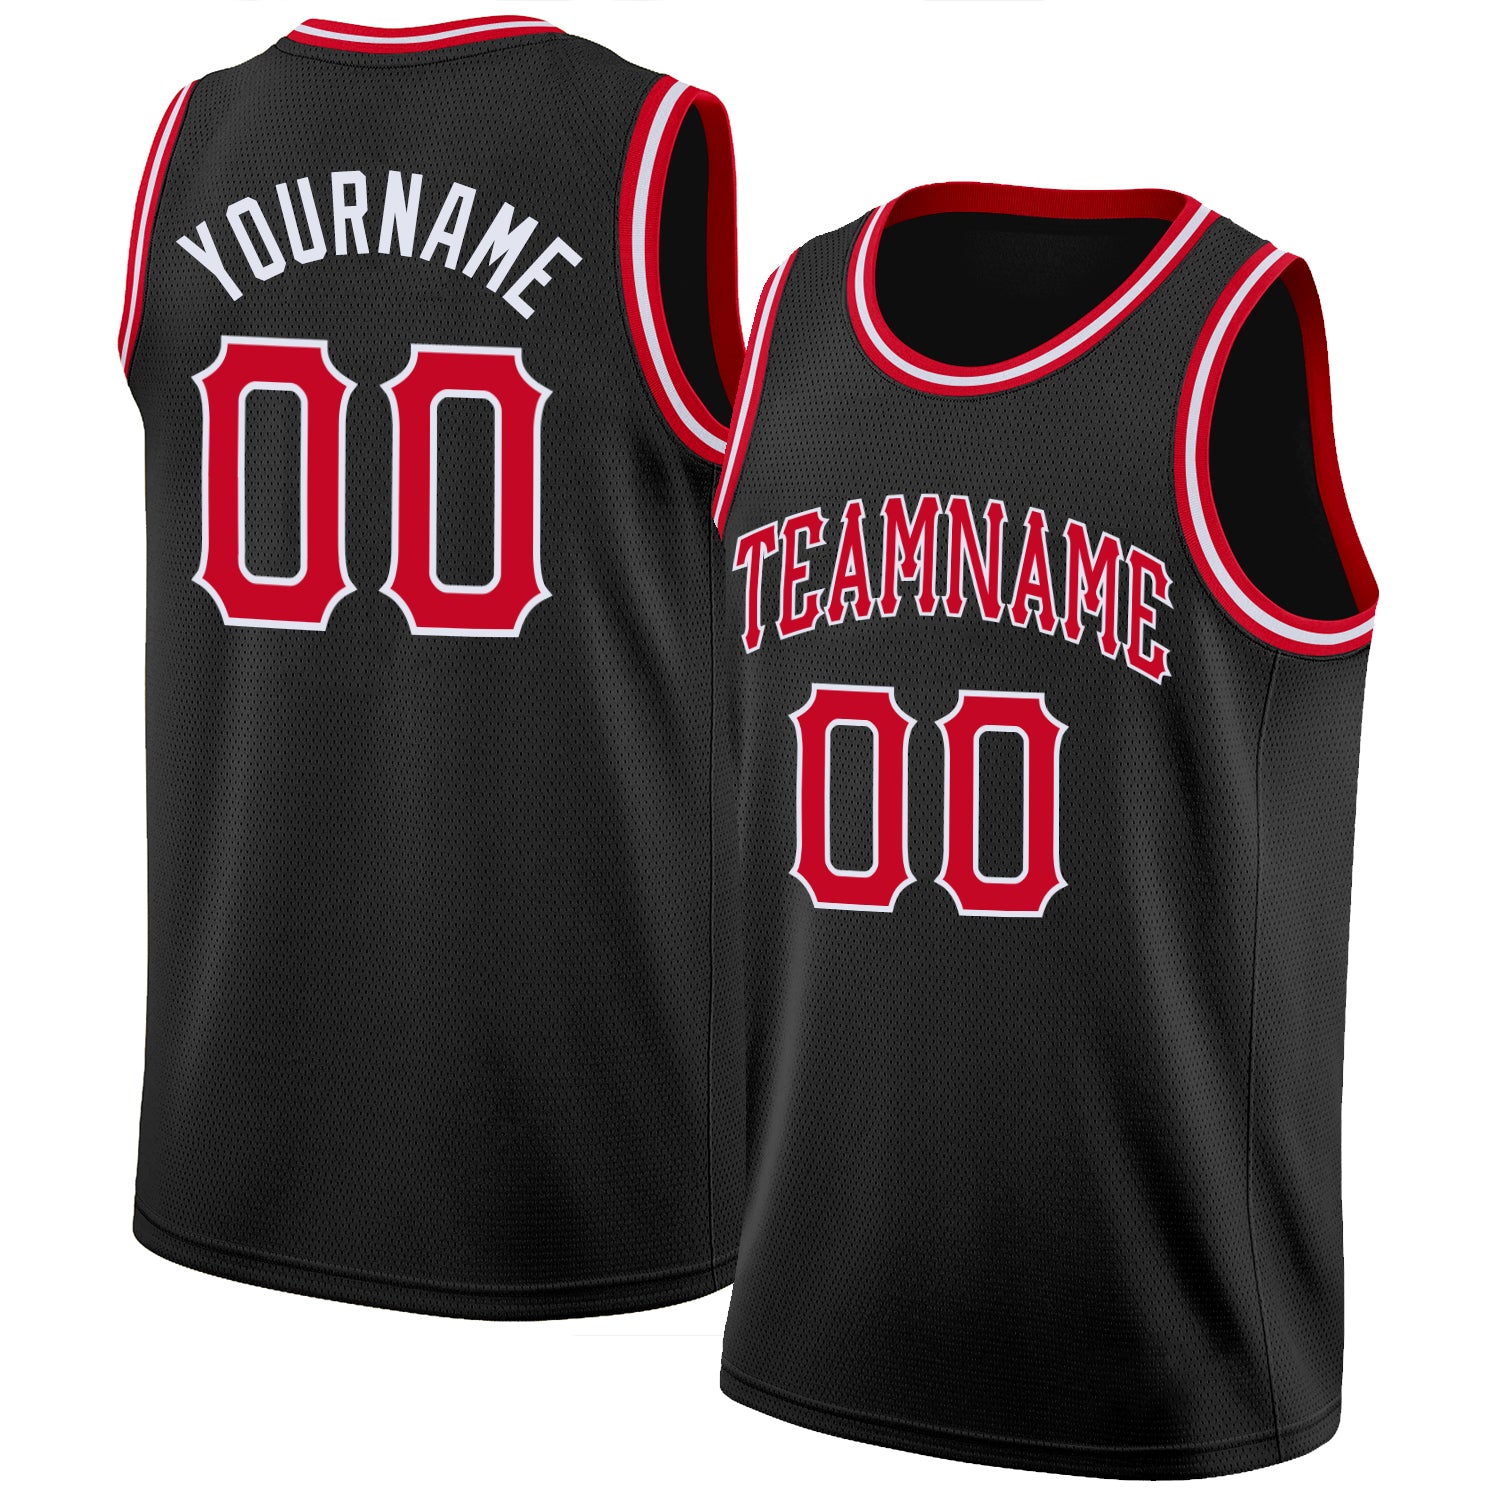 Black and Red Sleeveless Jersey